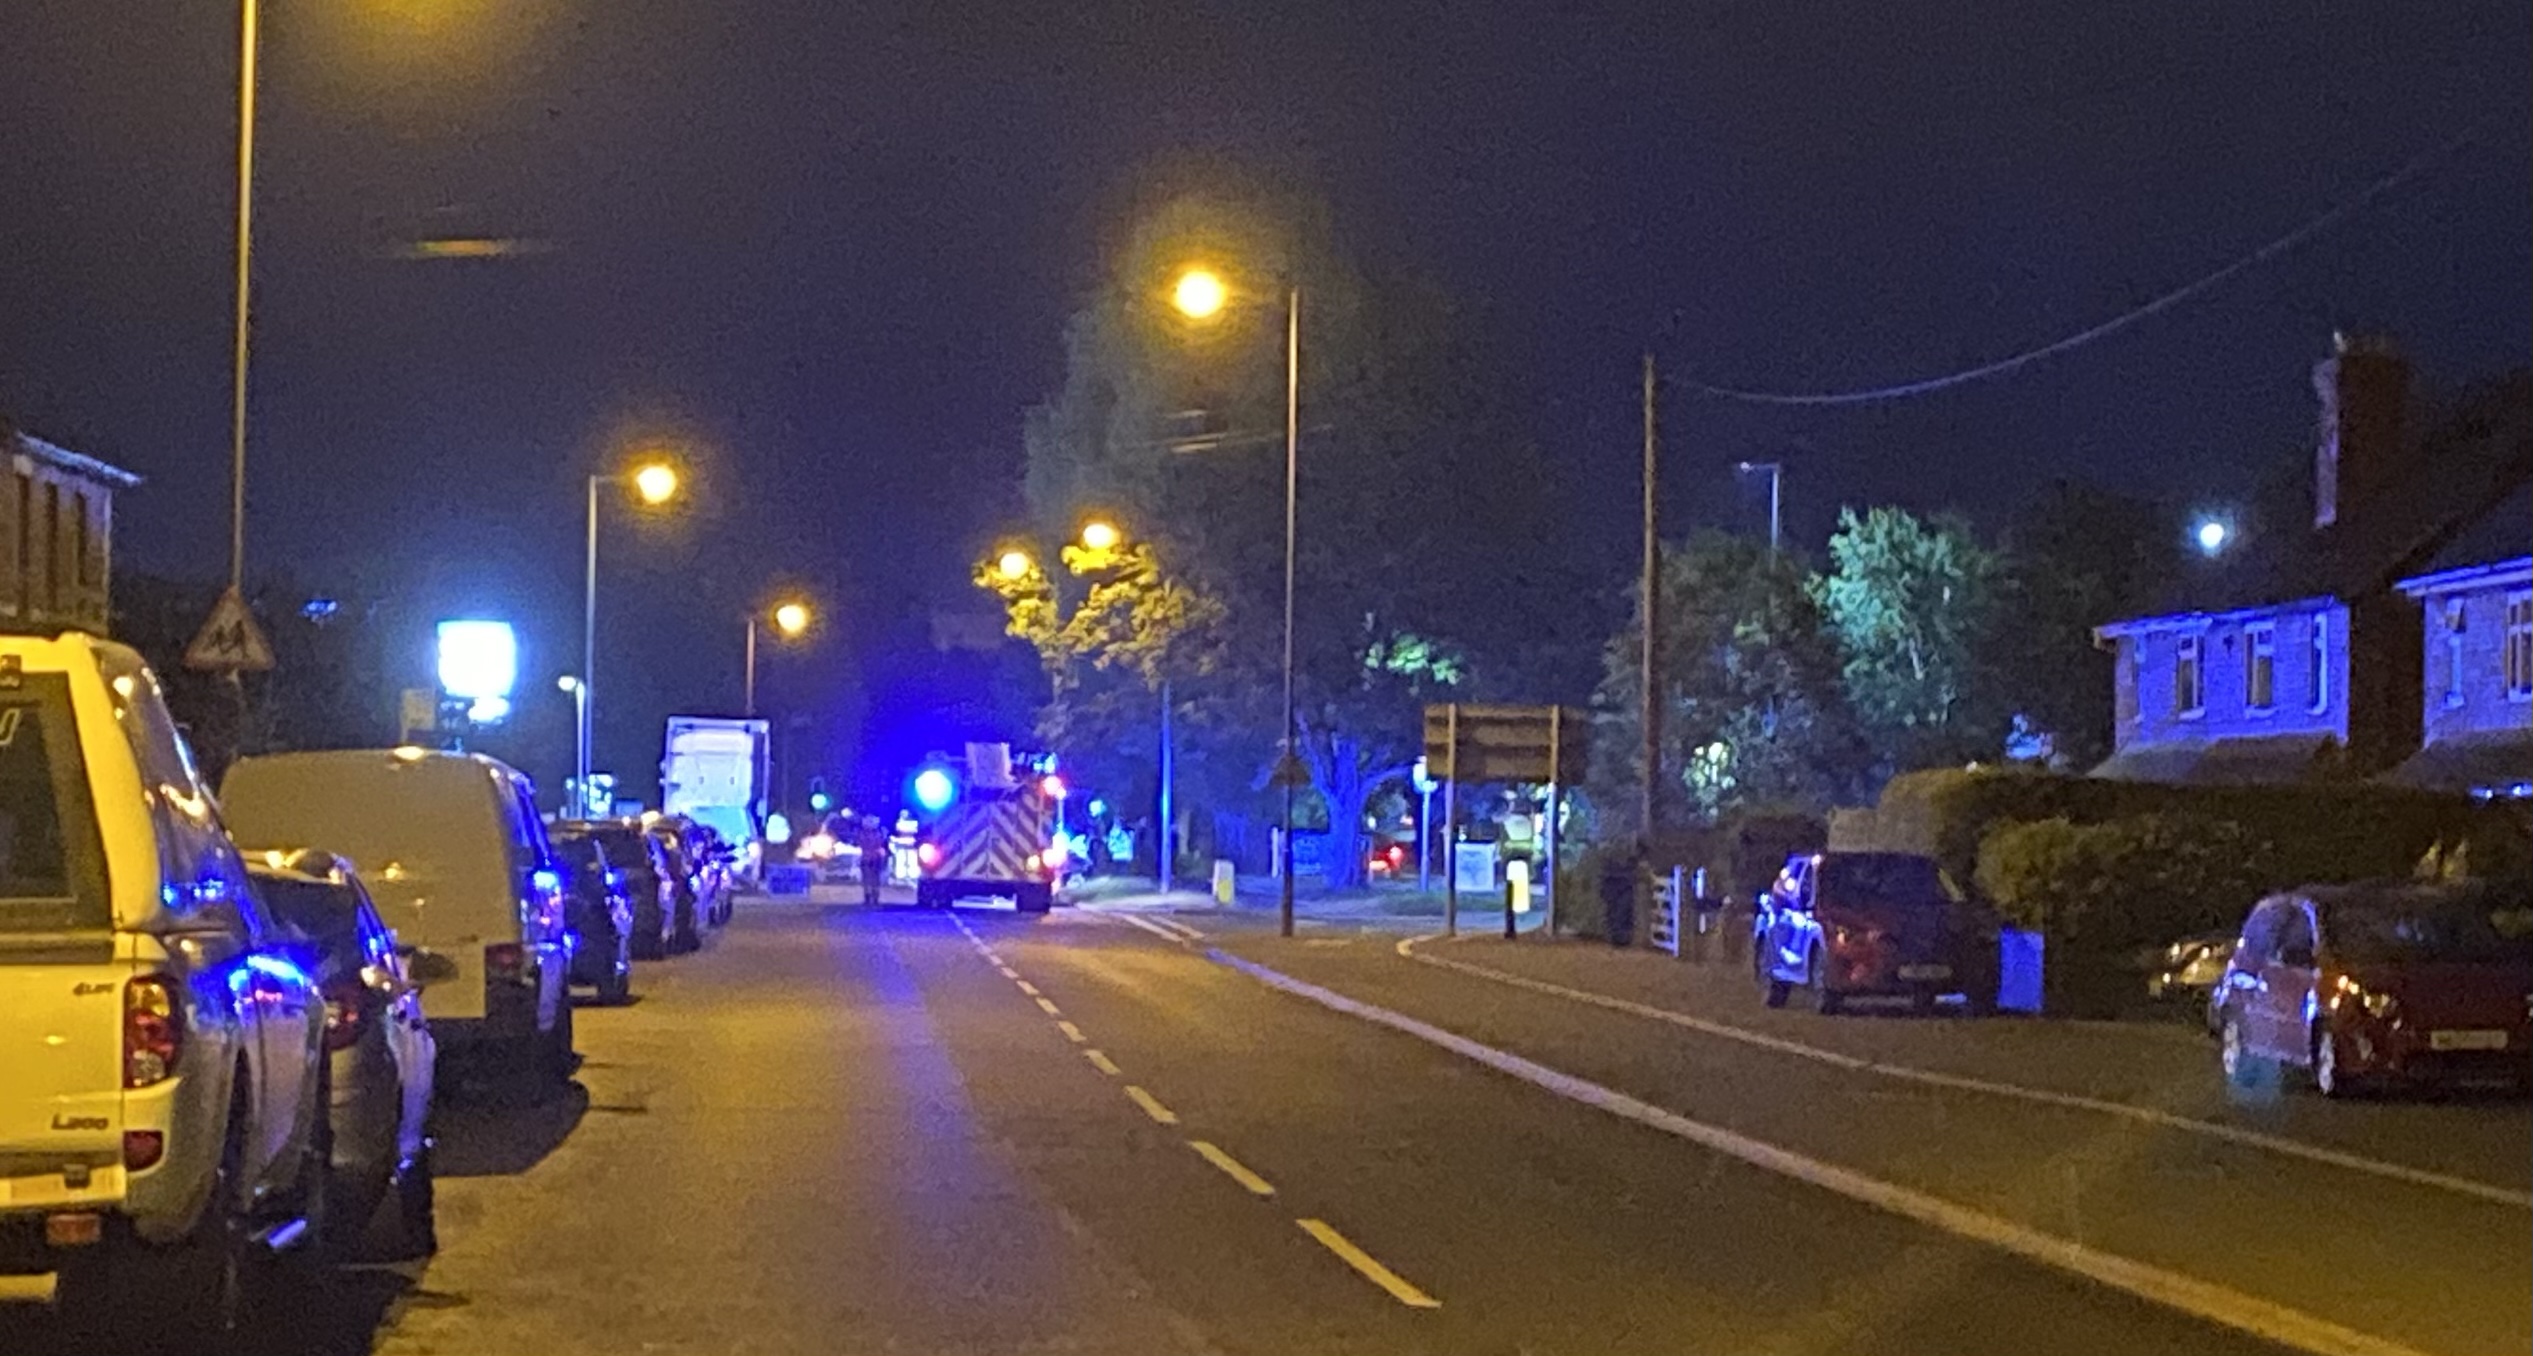 NEWS | A49 closed in Hereford following RTC involving two vehicles